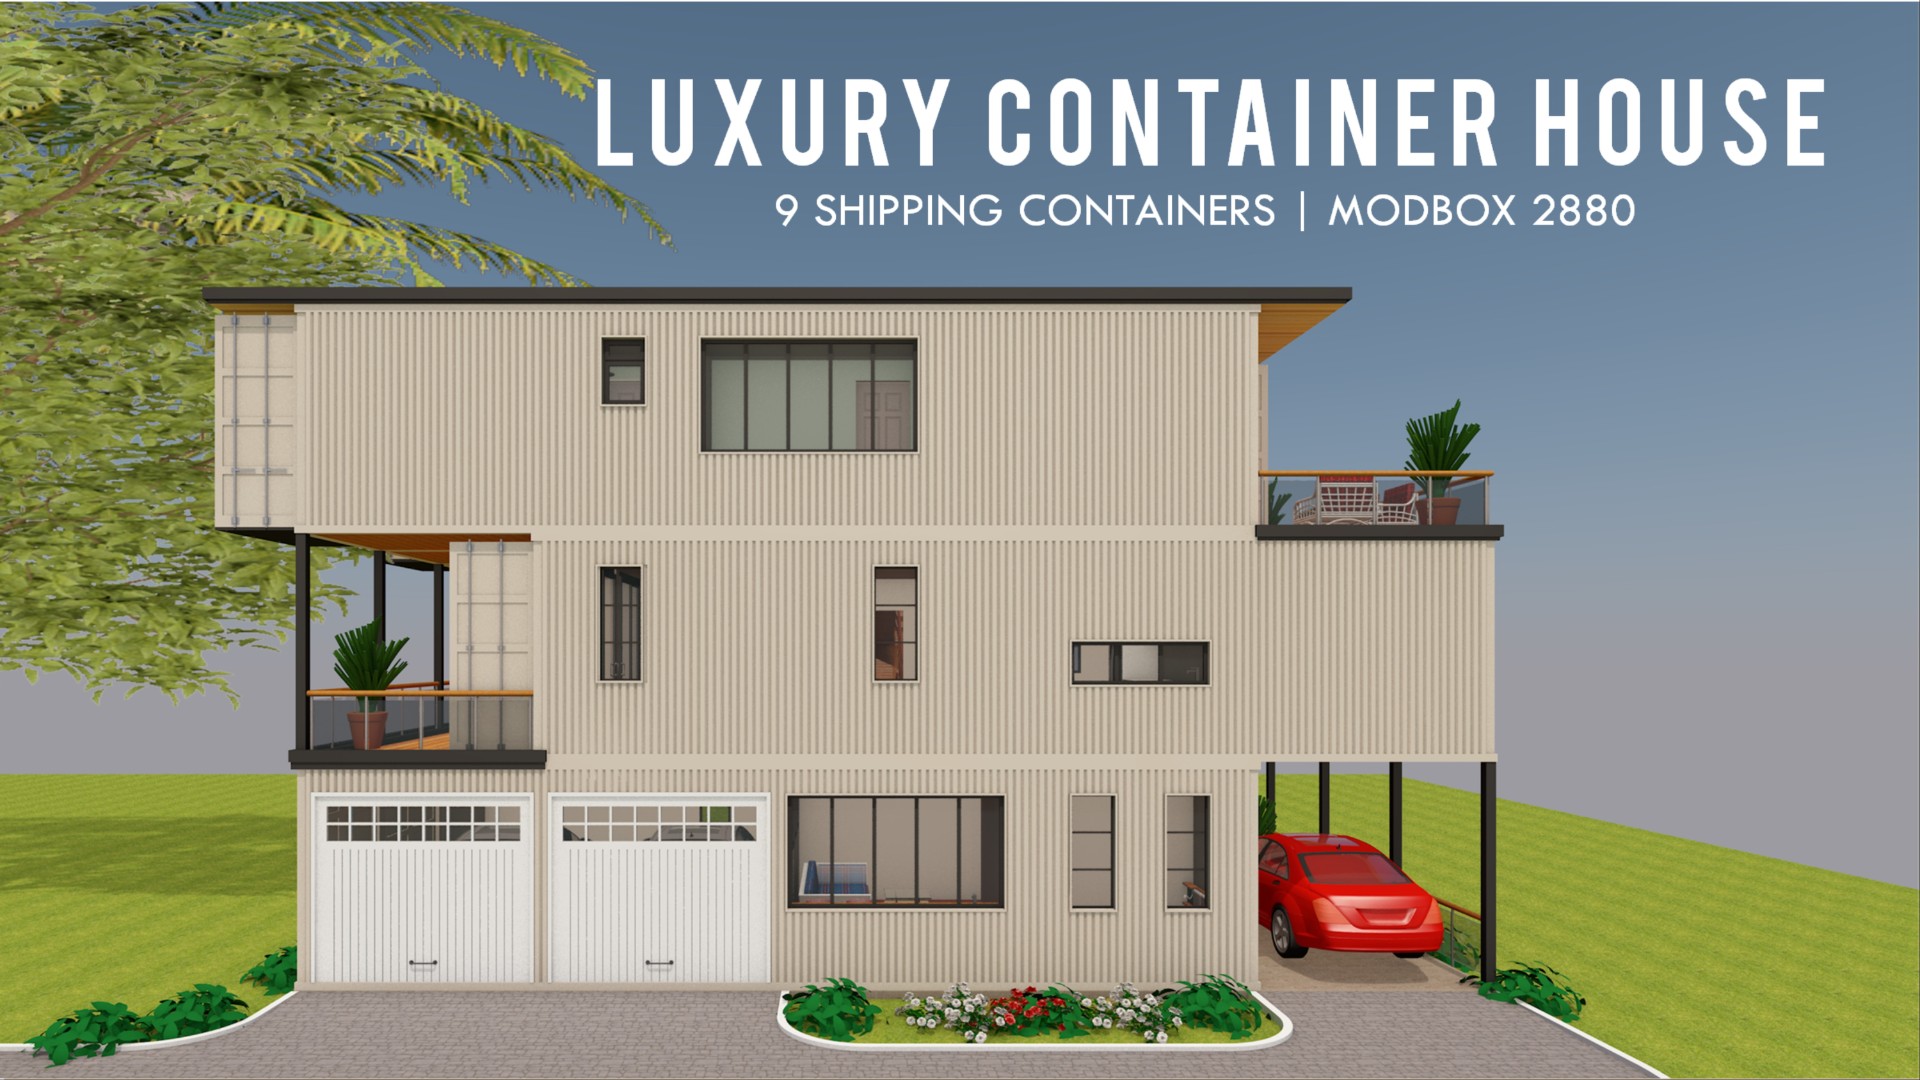 Luxury Shipping Container House Design Floor Plans 